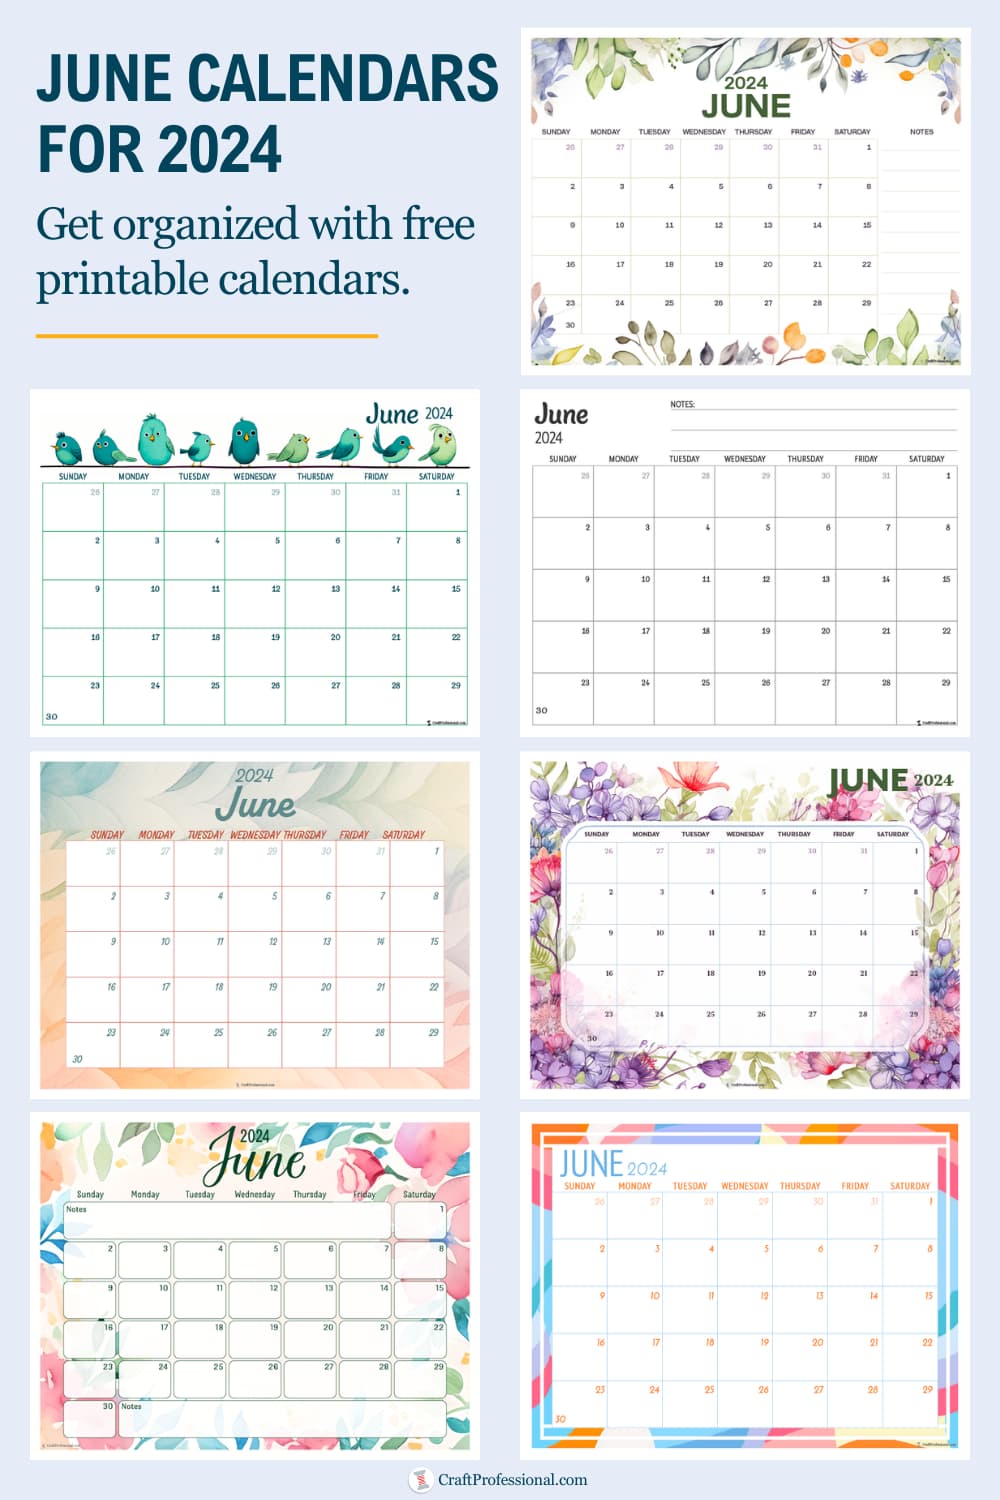 Collage of printable calendars. Text - June calendars for 2024. Get organized with free printable calendars.